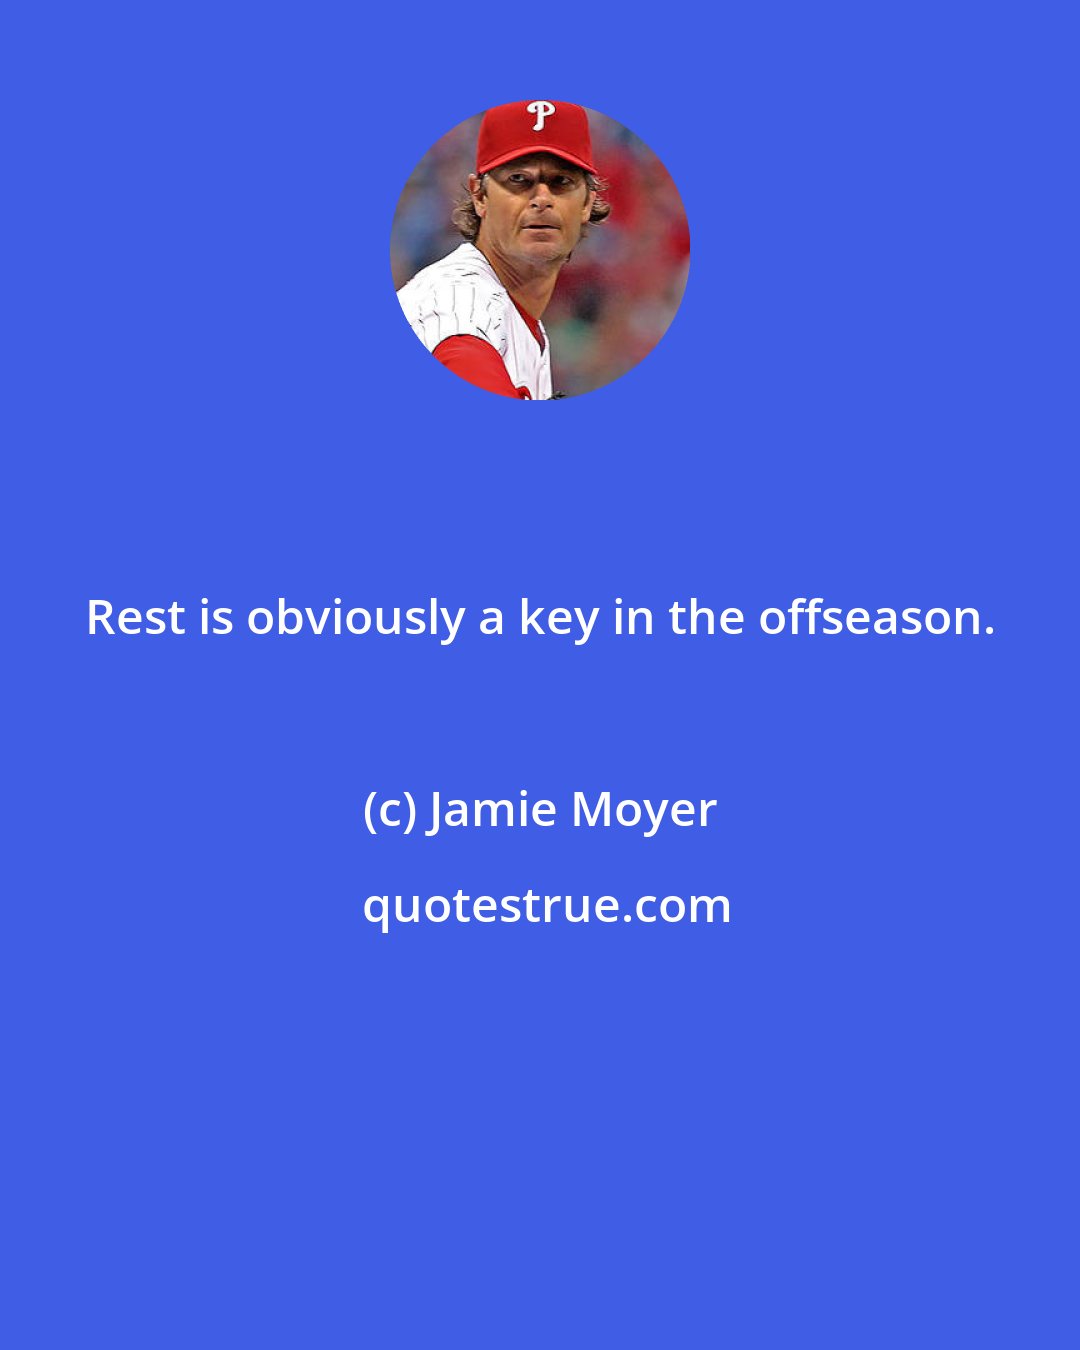 Jamie Moyer: Rest is obviously a key in the offseason.